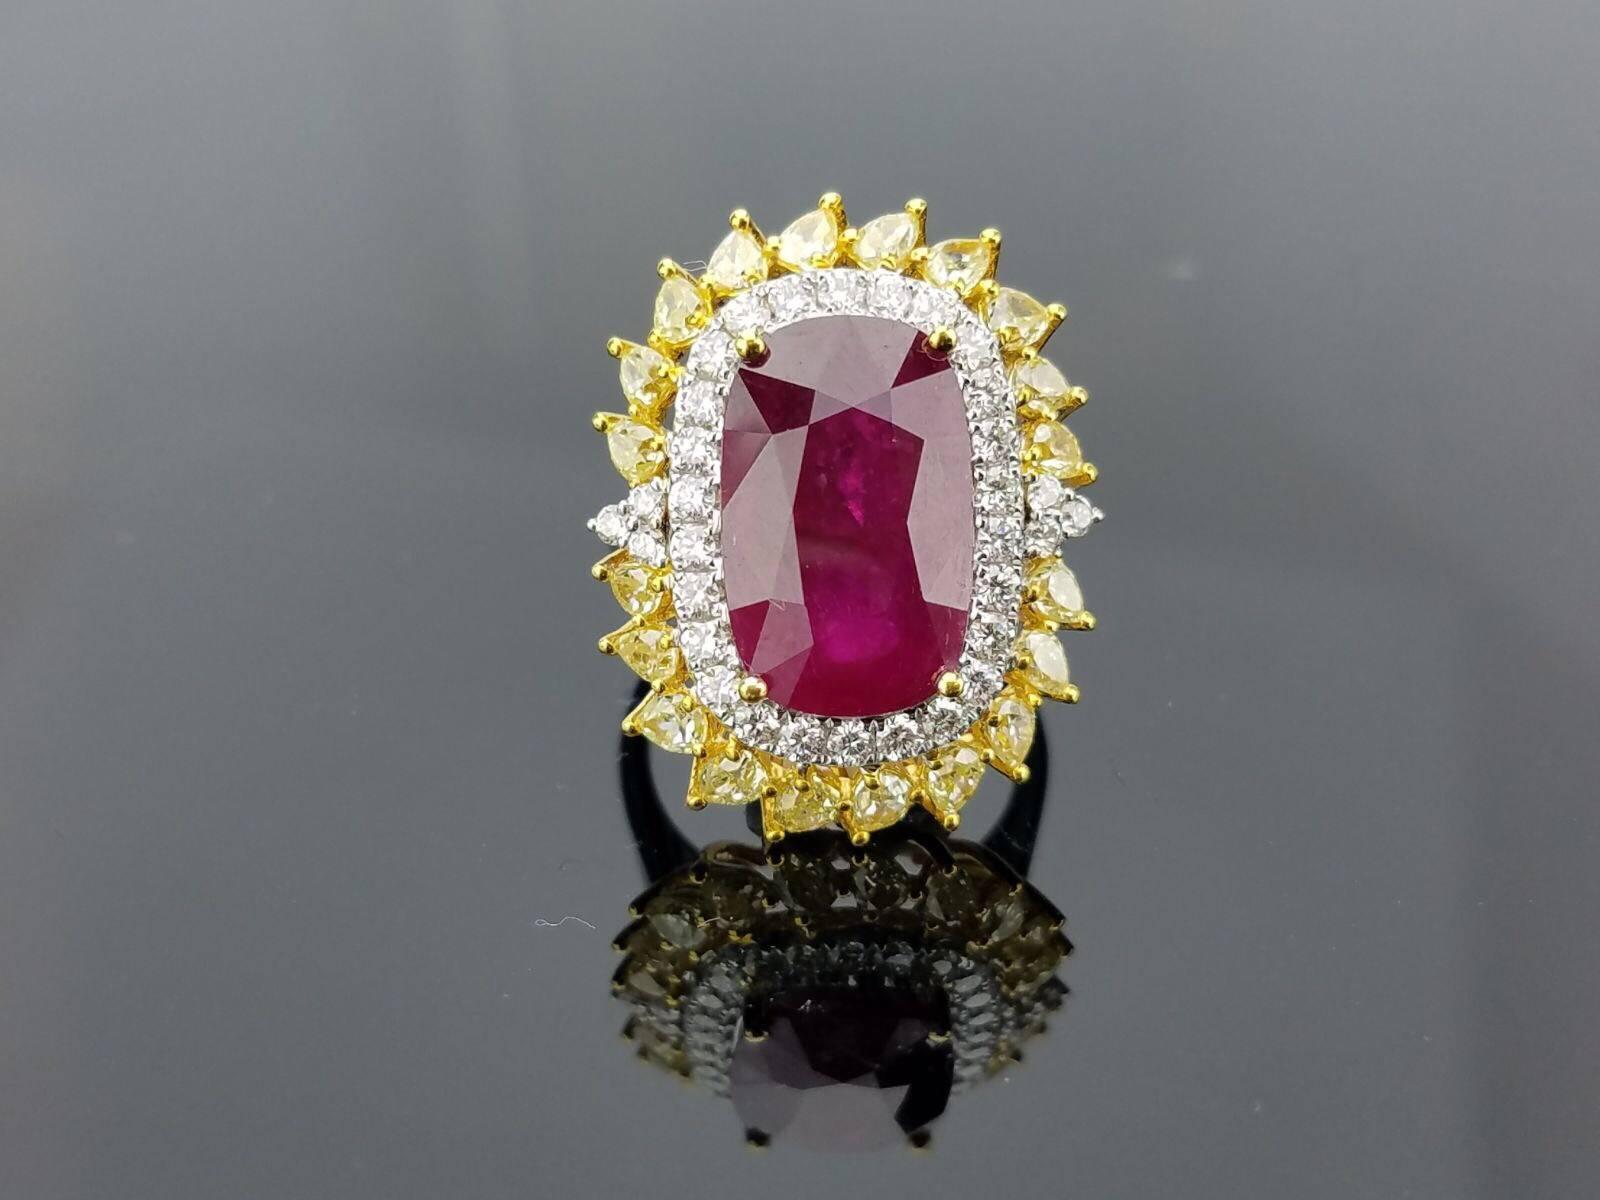 Statement Mozambique Ruby ring with yellow and white Diamond, set in yellow and white gold. 

Centre Stone Details:  
Stone: Burma Ruby
Cut: Oval
Weight: 16.8 carat

Diamond Details:
Cut: Brilliant (round) / Pear 
Total Carat Weight: 2.401 carat